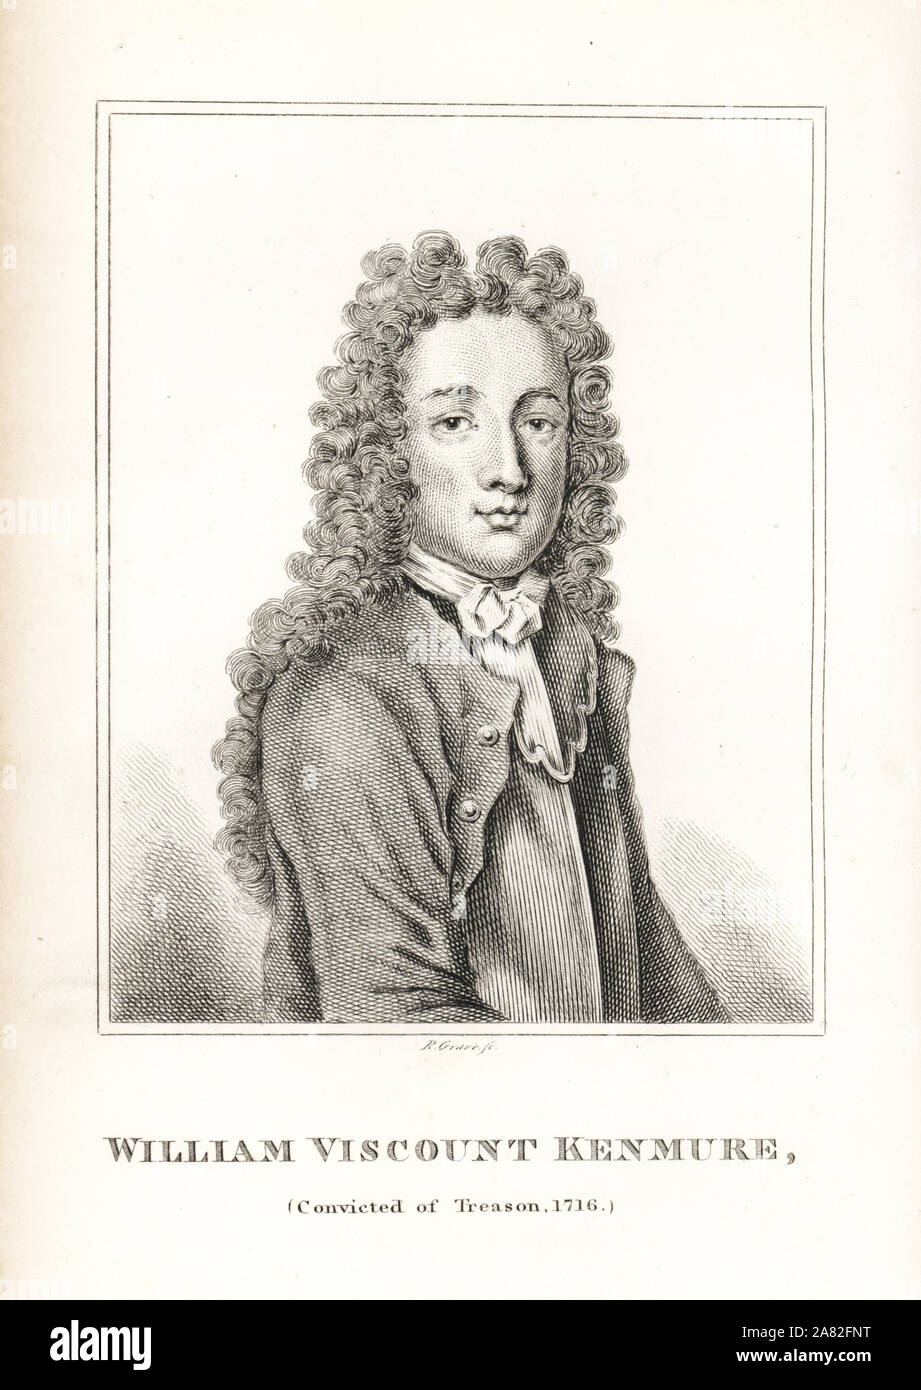 William Gordon, Viscount Kenmure, rebel supporter, convicted of treason, beheaded at Tower Hill, 1716. Engraving by R. Grave from James Caulfield's Portraits, Memoirs and Characters of Remarkable Persons, London, 1819. Stock Photo